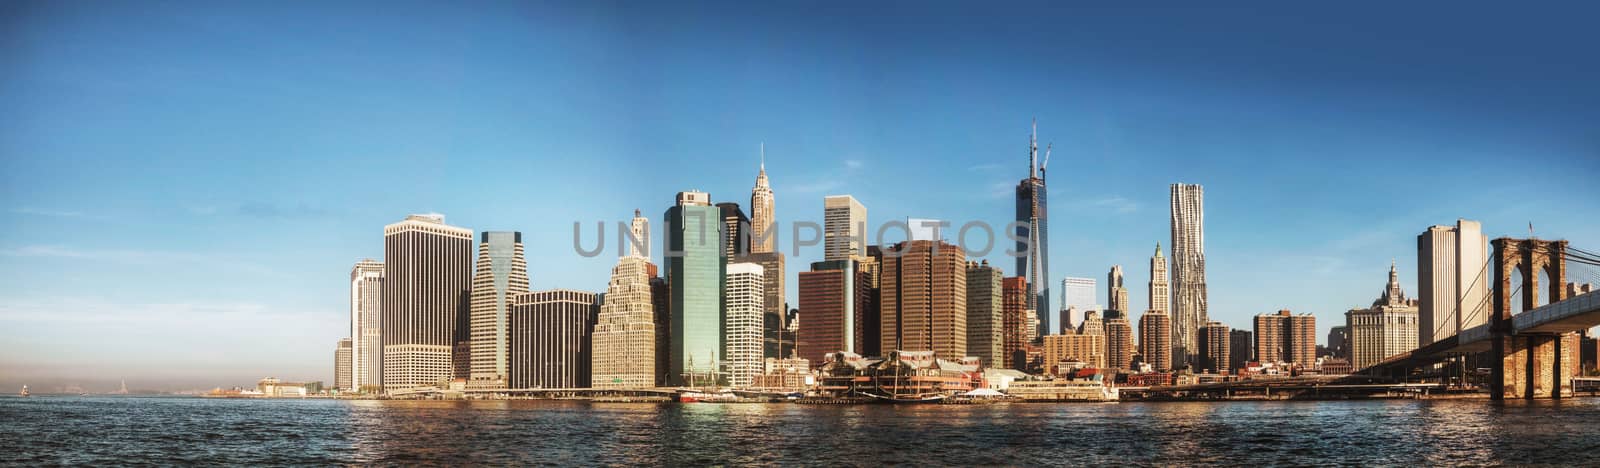 New York City panorama in the morning by AndreyKr